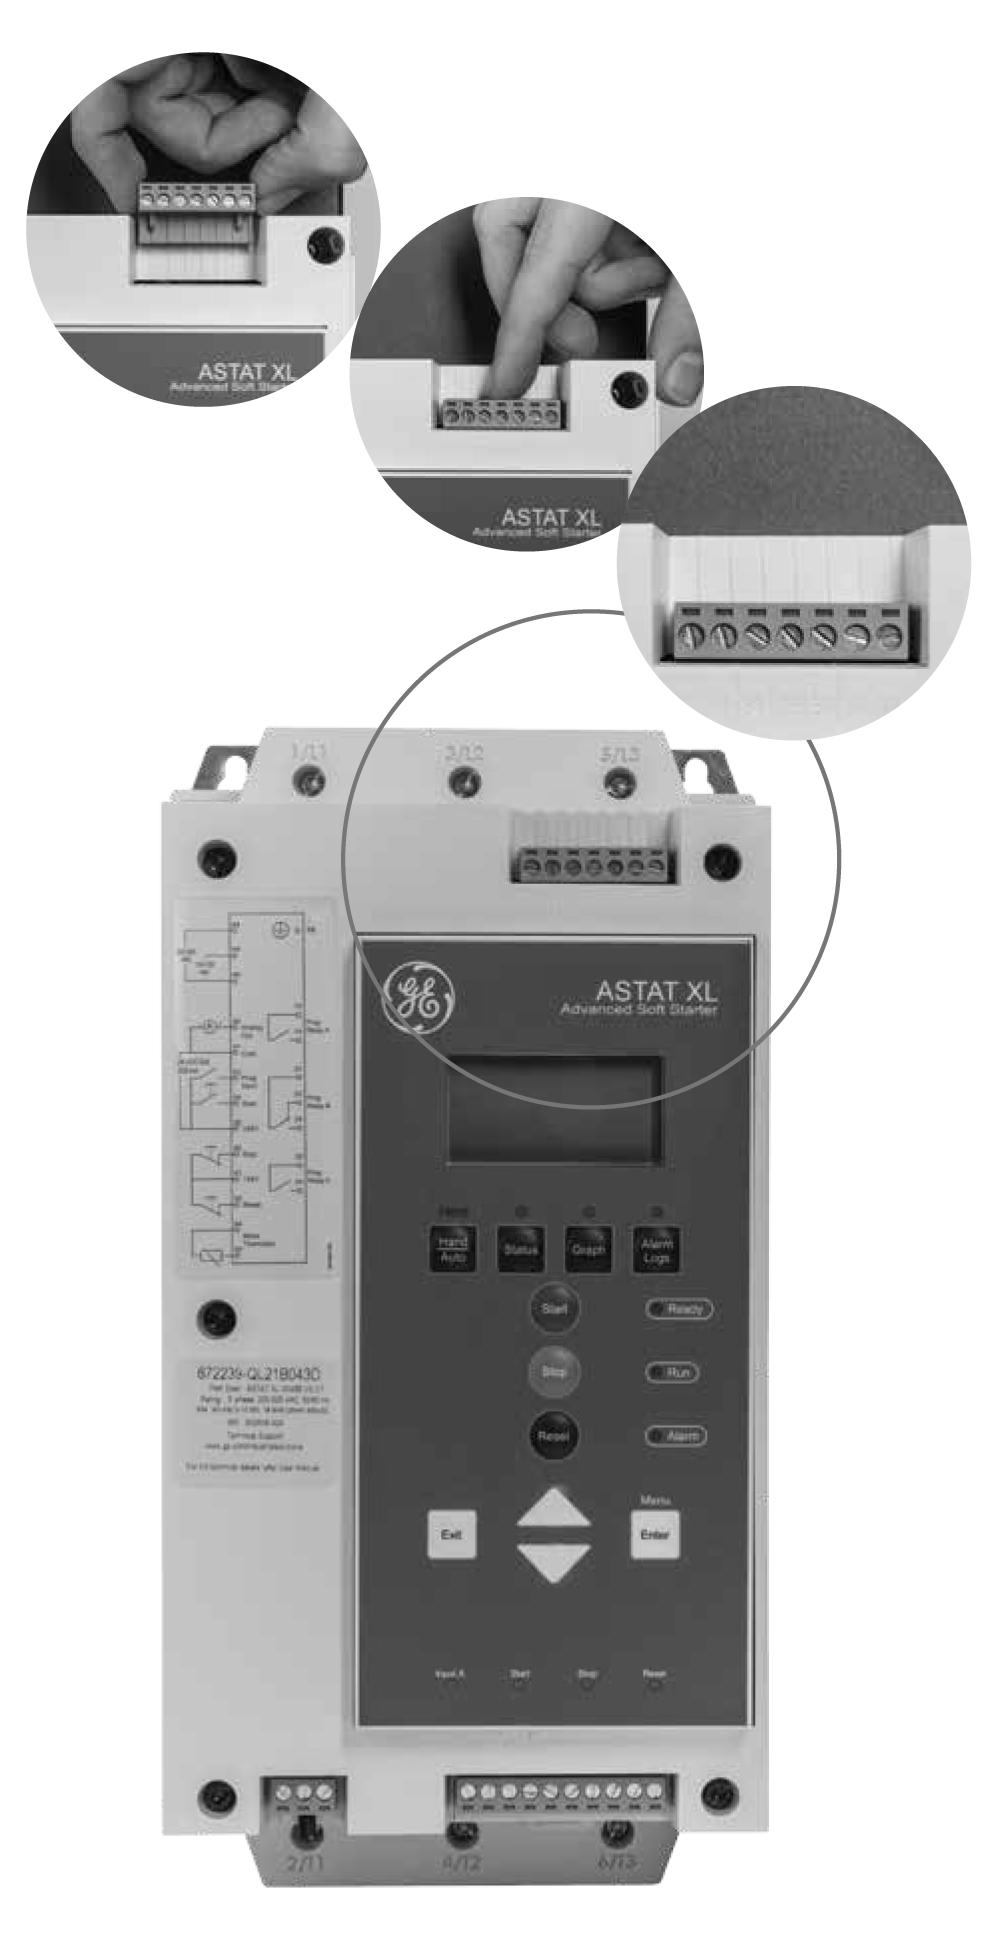 ASTAT XL Soft Starters Basic wiring diagrams 1 x programmable input where you can connect transducers and probes, simpler control circuits and lower installation cost.